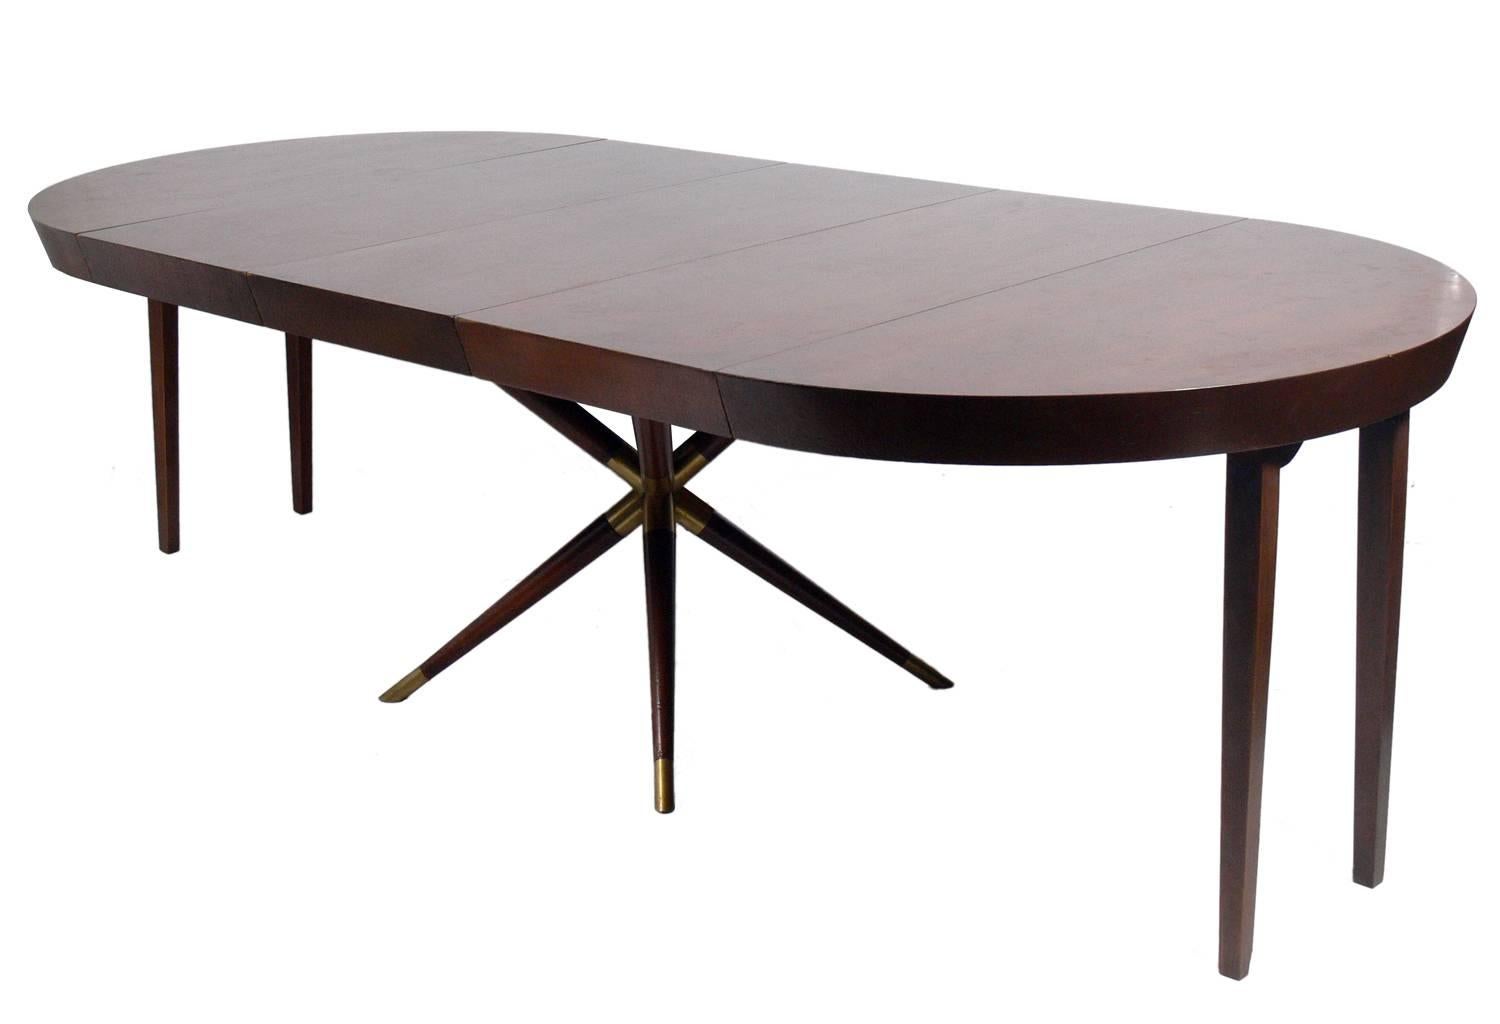 Mid-20th Century Incredible Italian Dining Table, Seats Four-Ten People